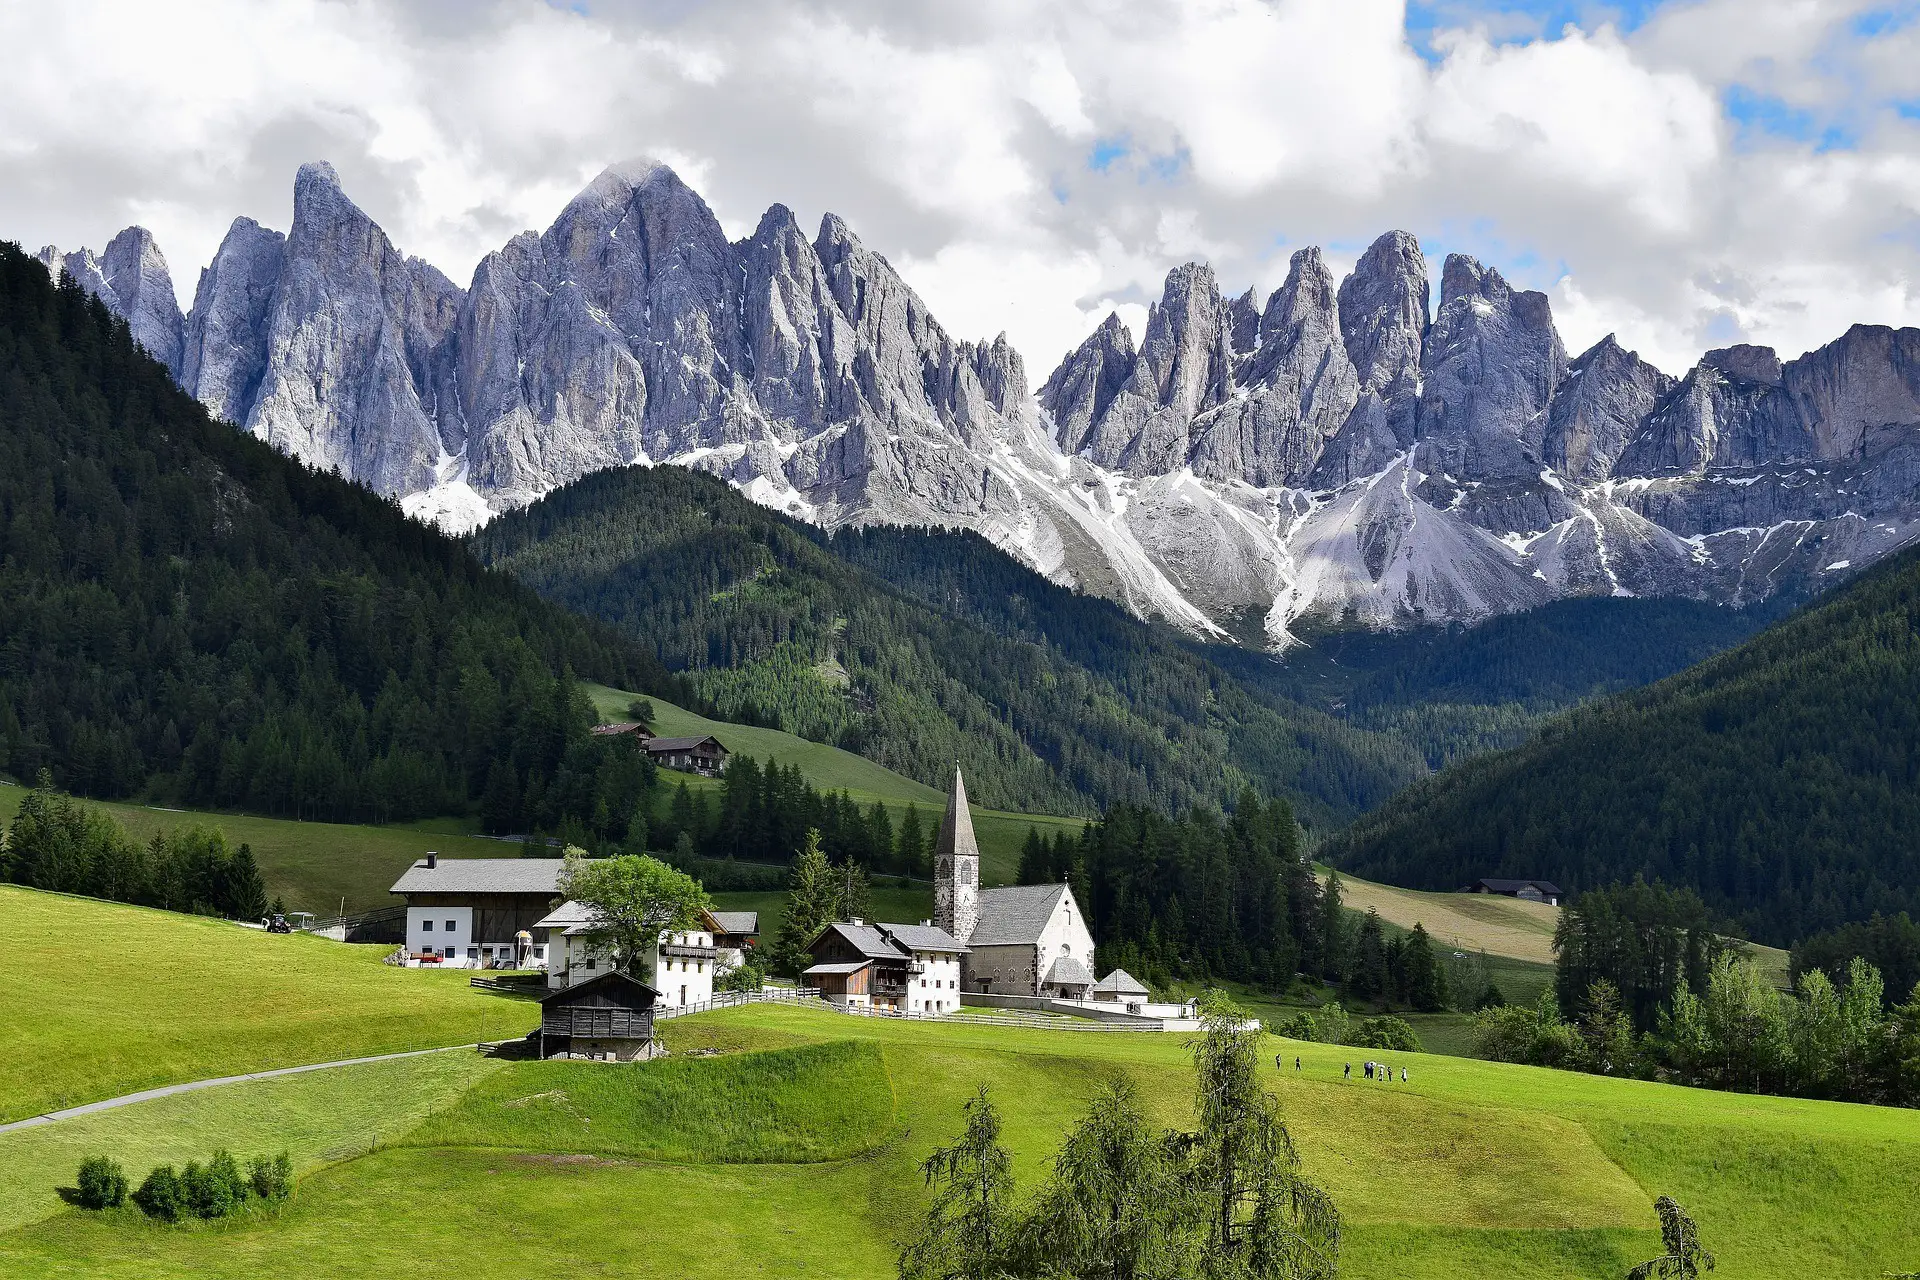 Where to Stay in Italy for Adventure The Dolomites